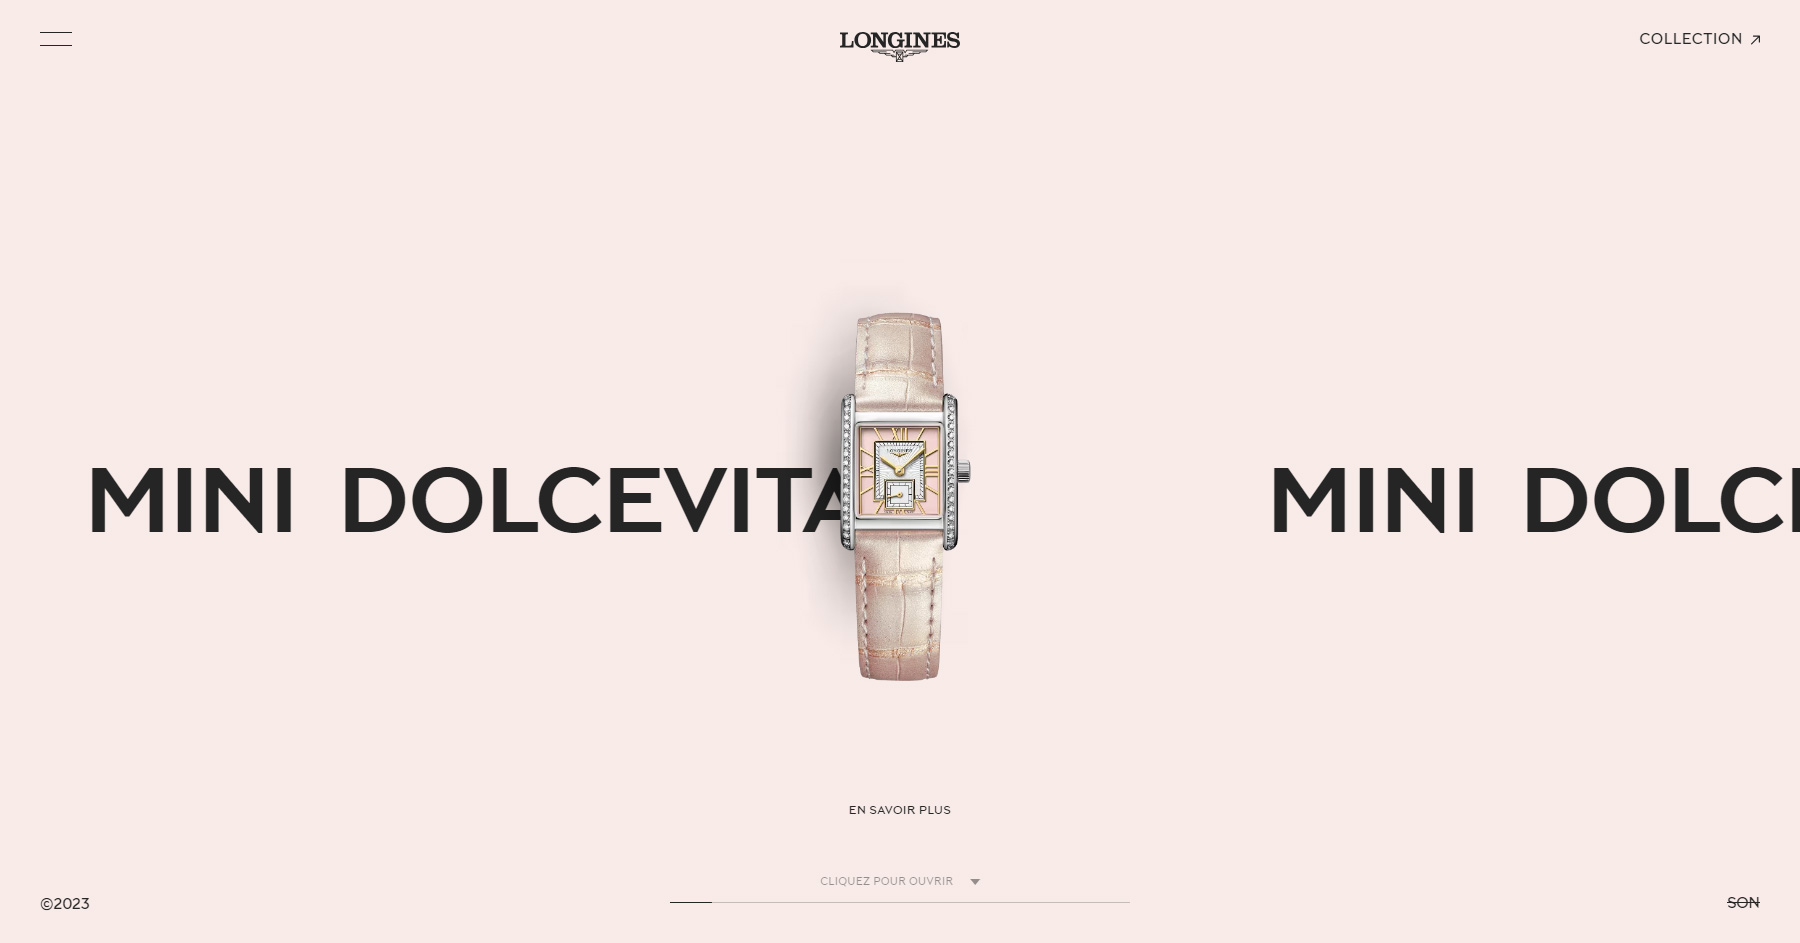 Longines Dolcevita - Website of the Day